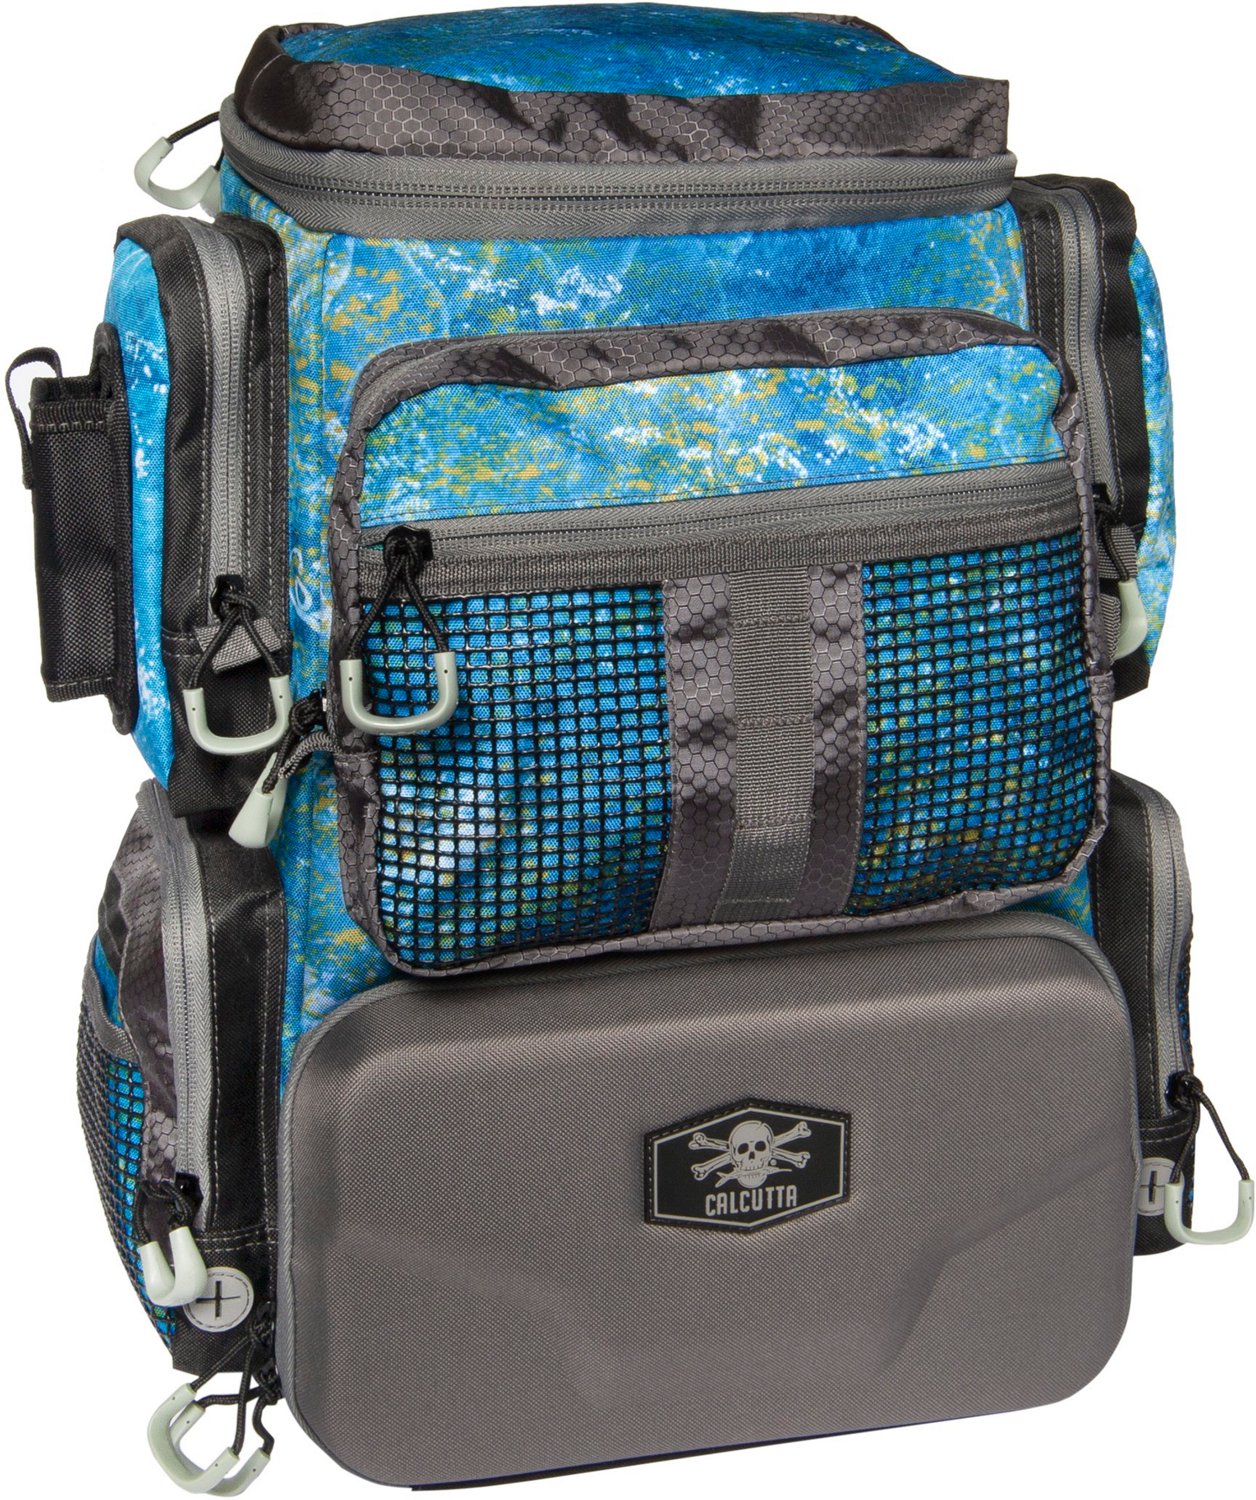 Academy Sports + Outdoors Calcutta Squall Tactical Tackle Backpack